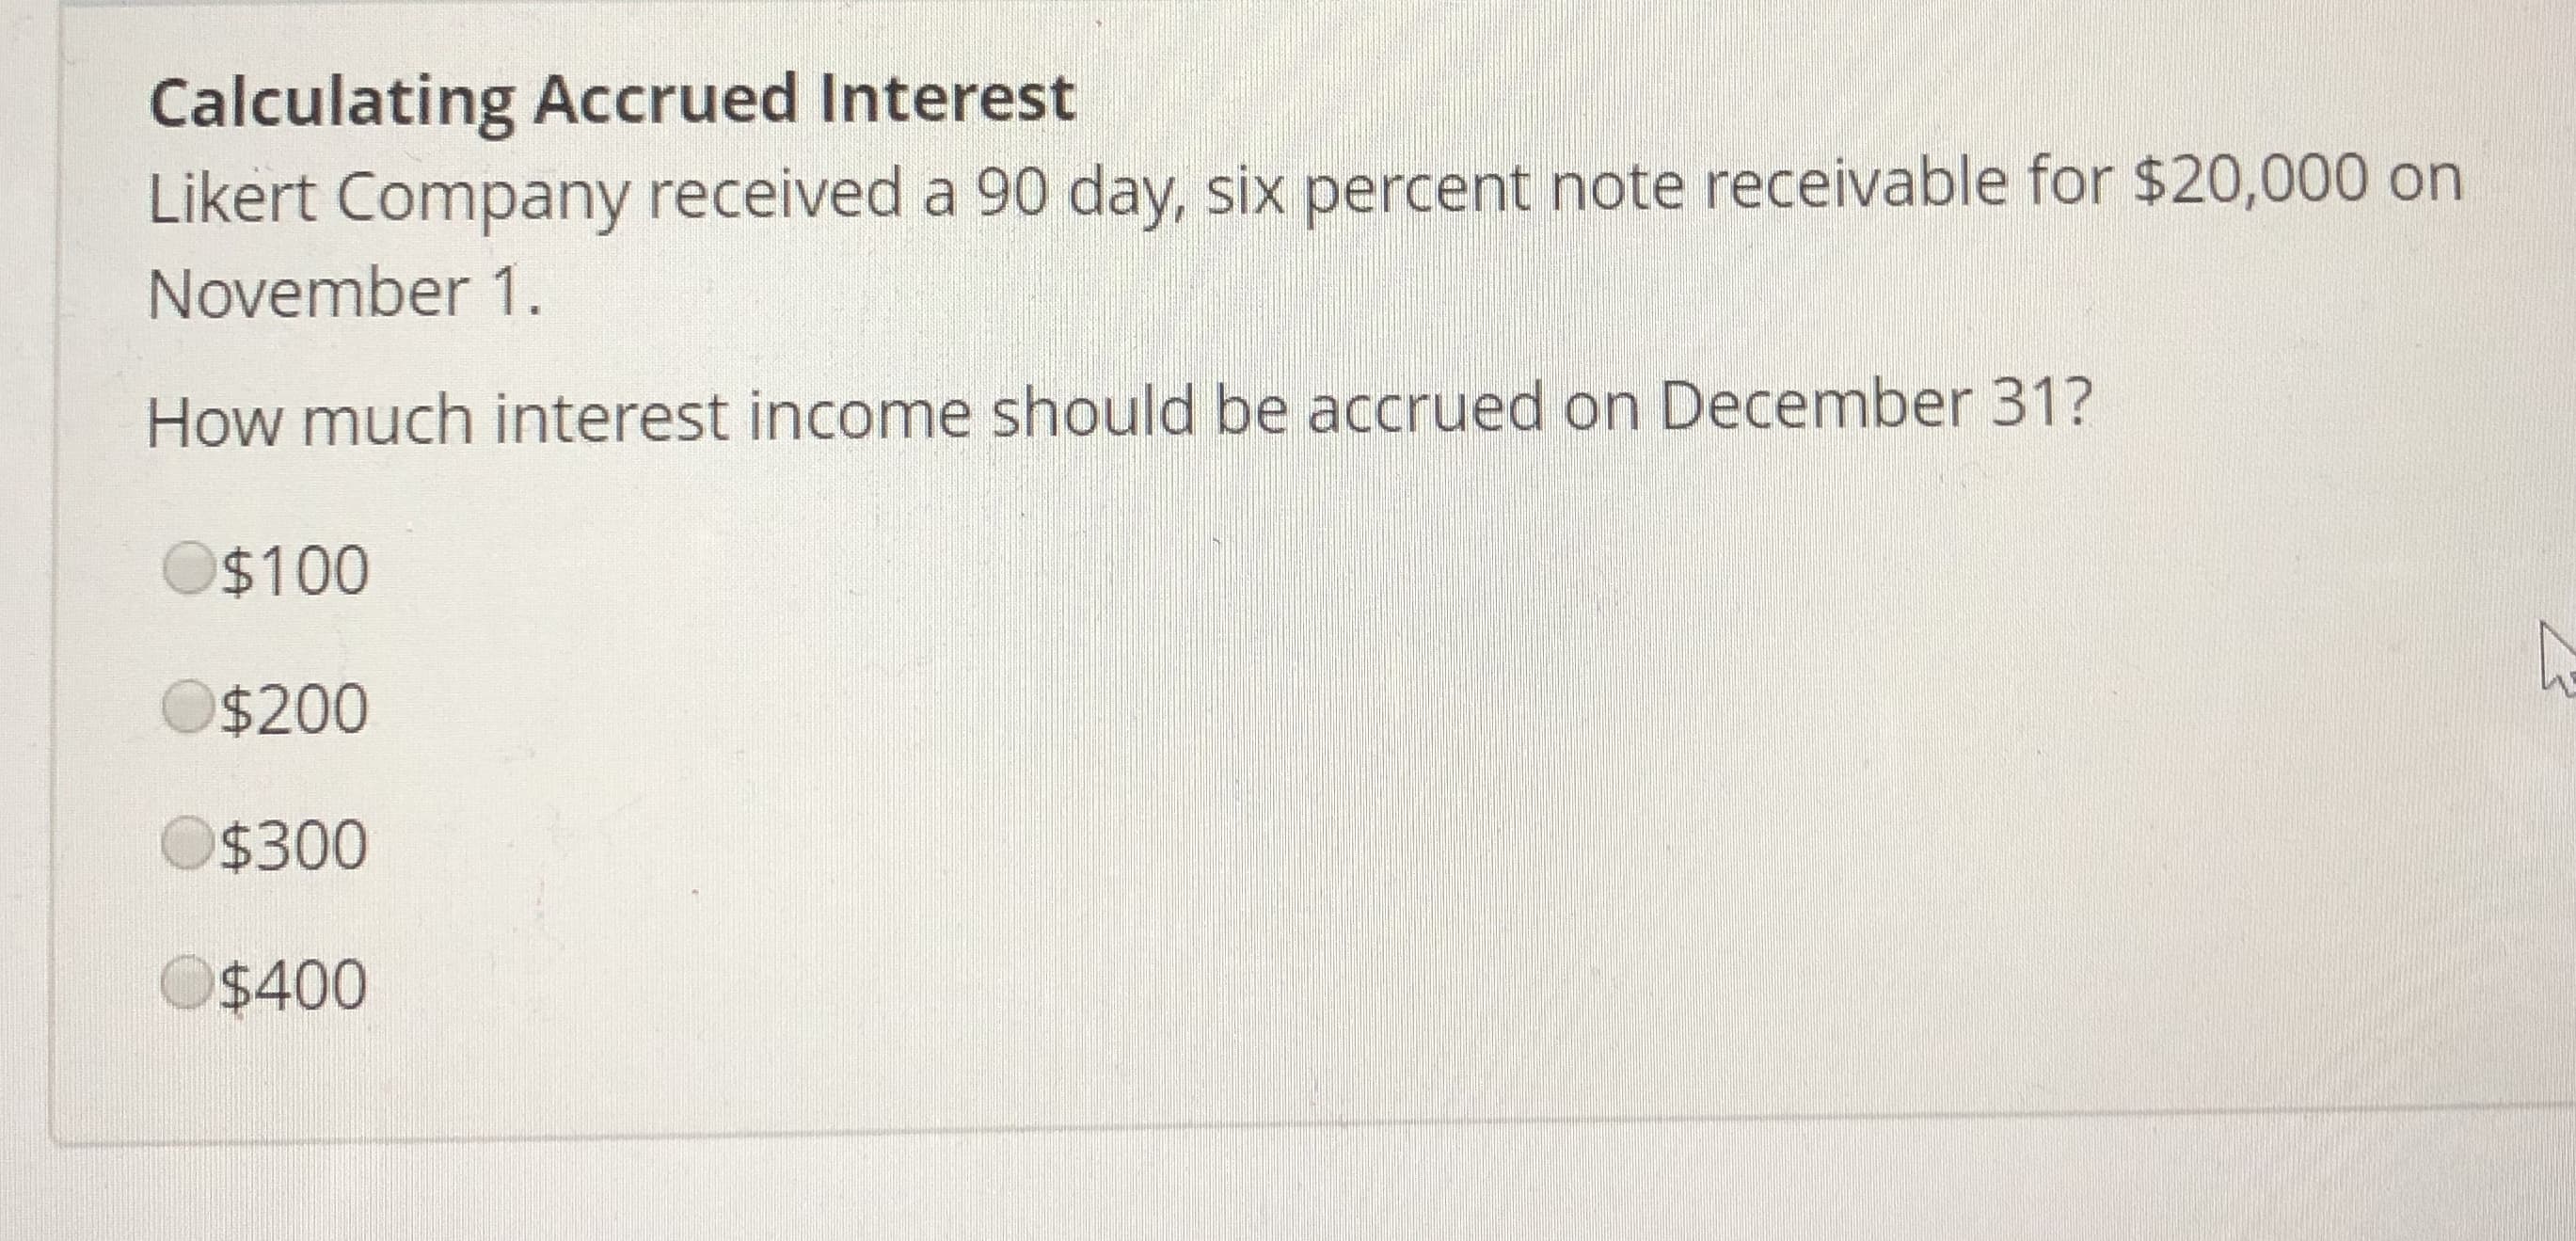 Calculating Accrued Interest
Likert Company received a 90 day, six percent note receivable for $20,000 orn
November 1.
How much interest income should be accrued on December 31?
$100
$200
$300
$400
